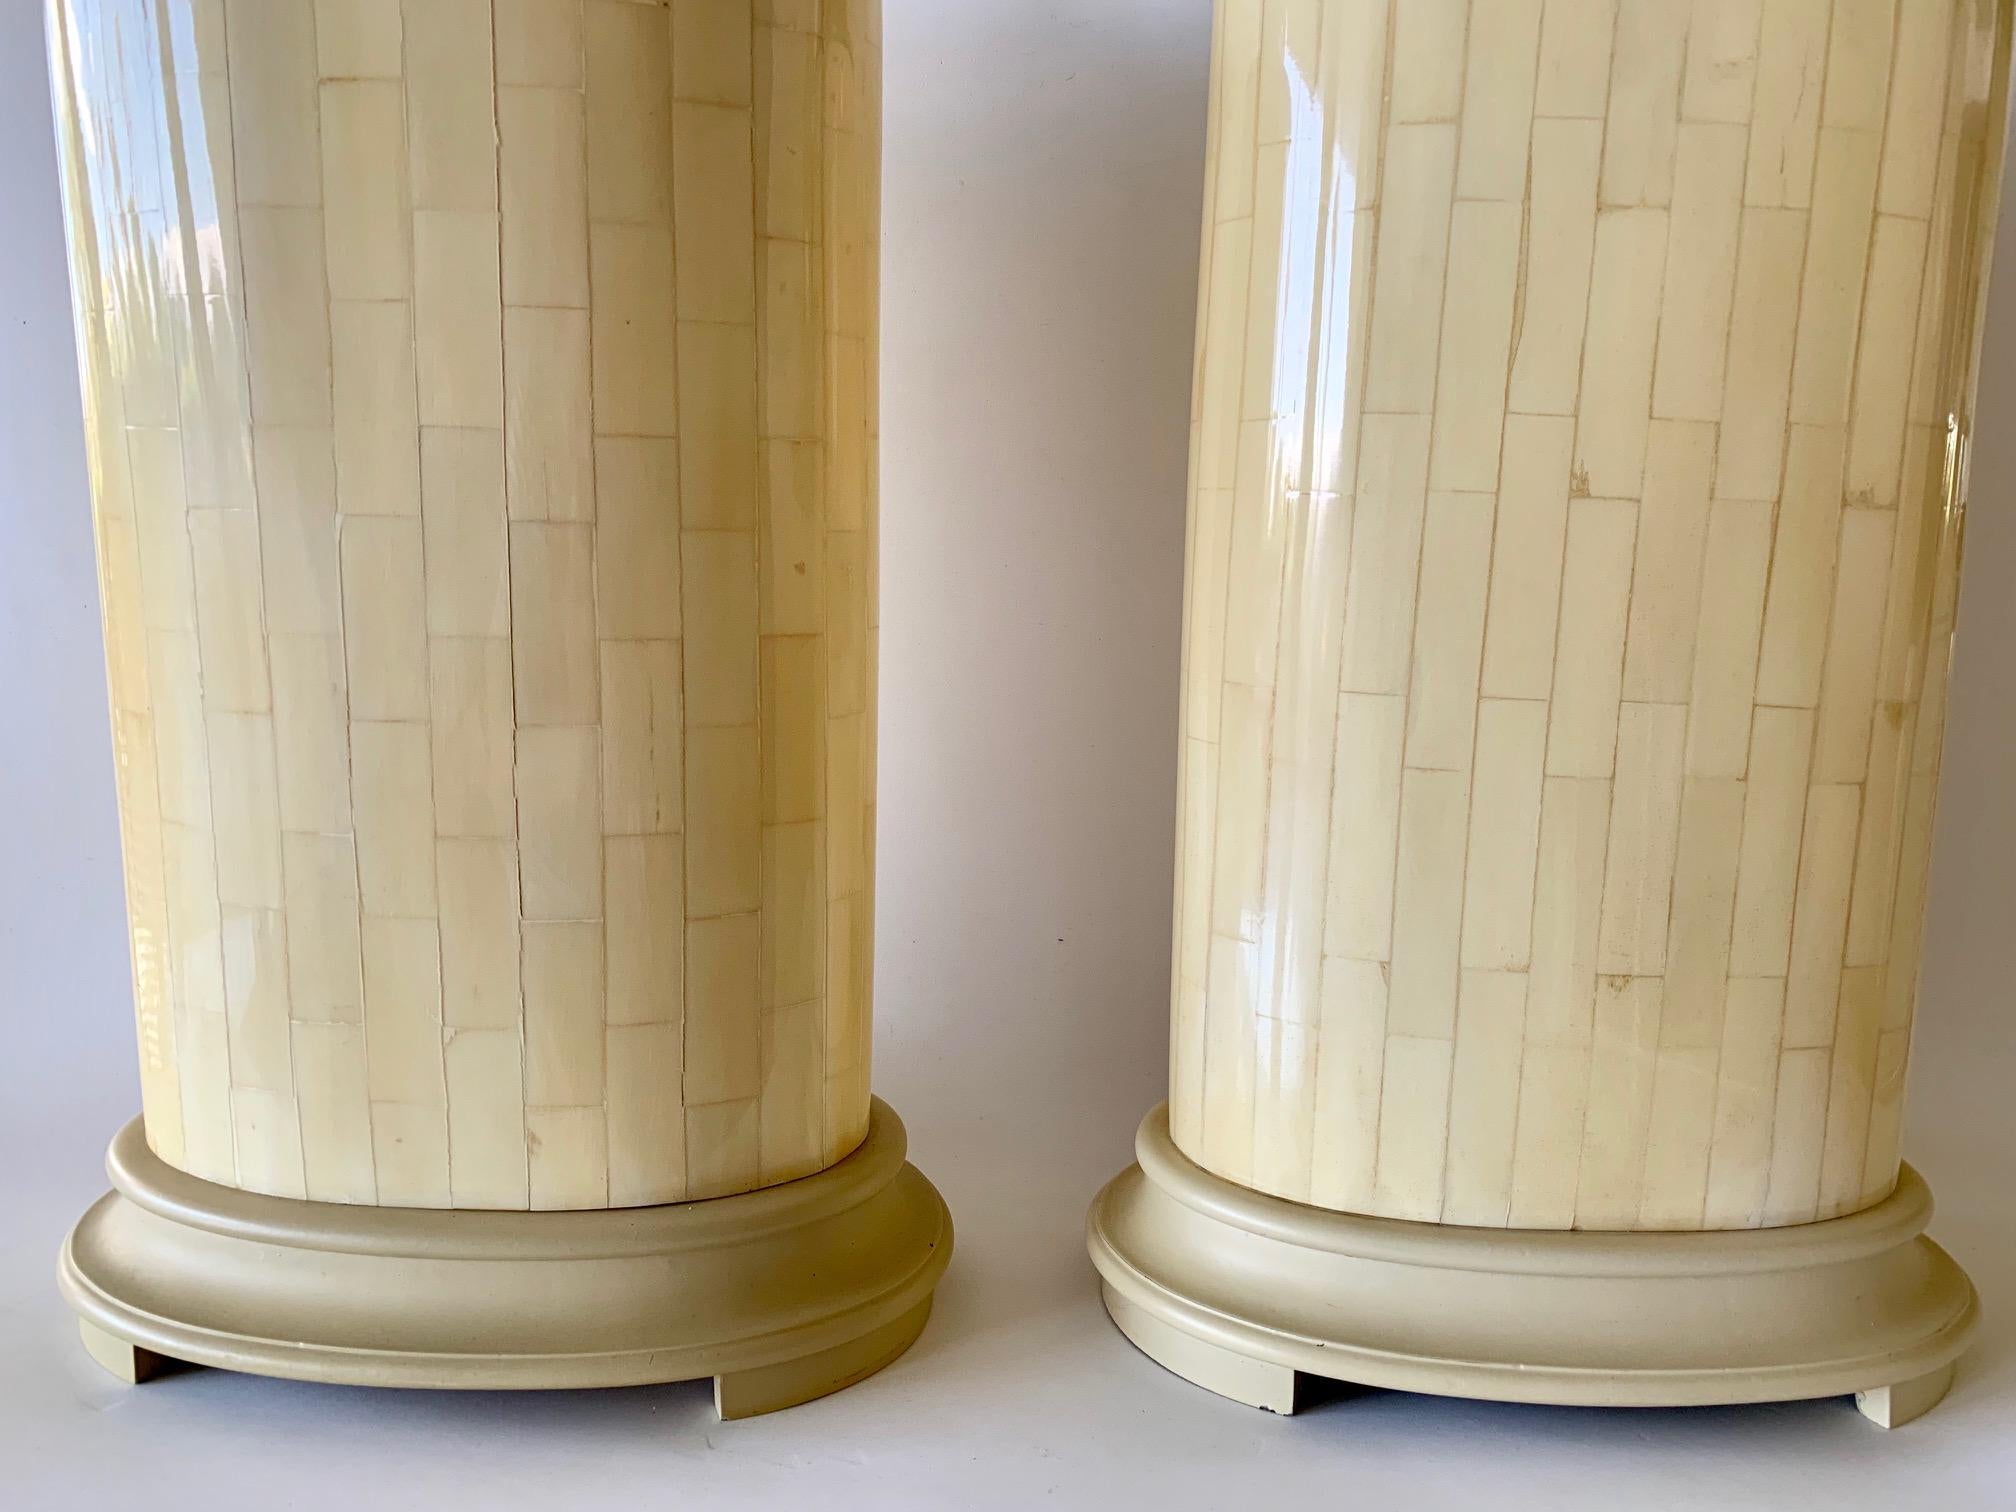 Glamorous Postmodern tessellated stone table lamps, circa the 1980s. These striking lamps are designed with tessellated bone and wired with brass fittings. The lamps feature an oval shape which creates a unique simplistic striking design. The